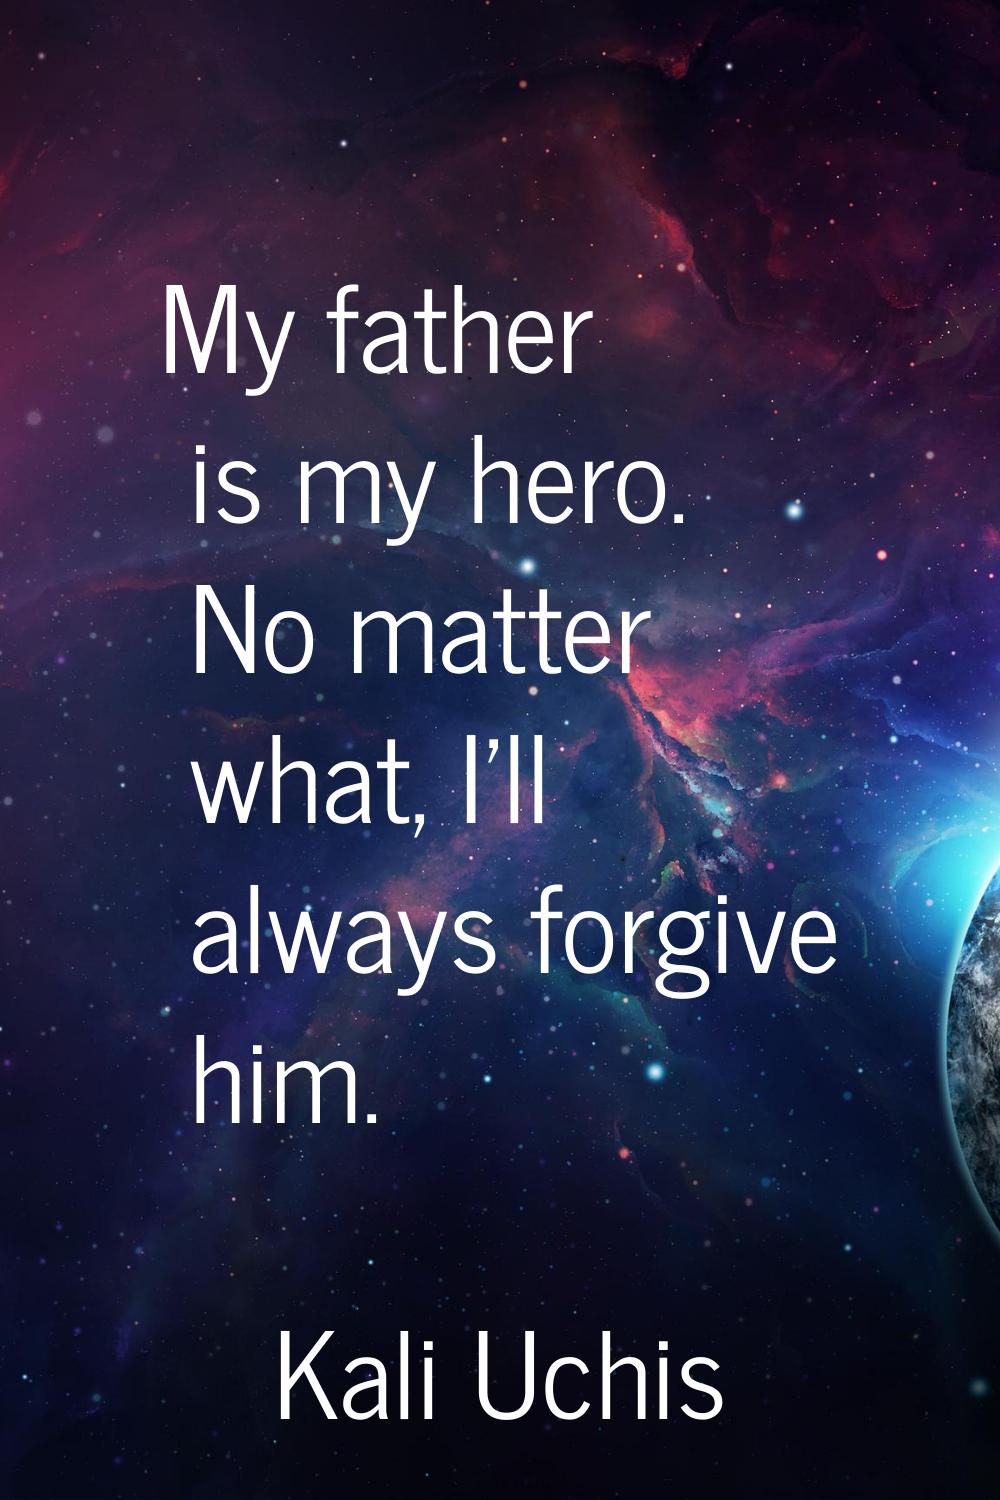 My father is my hero. No matter what, I'll always forgive him.